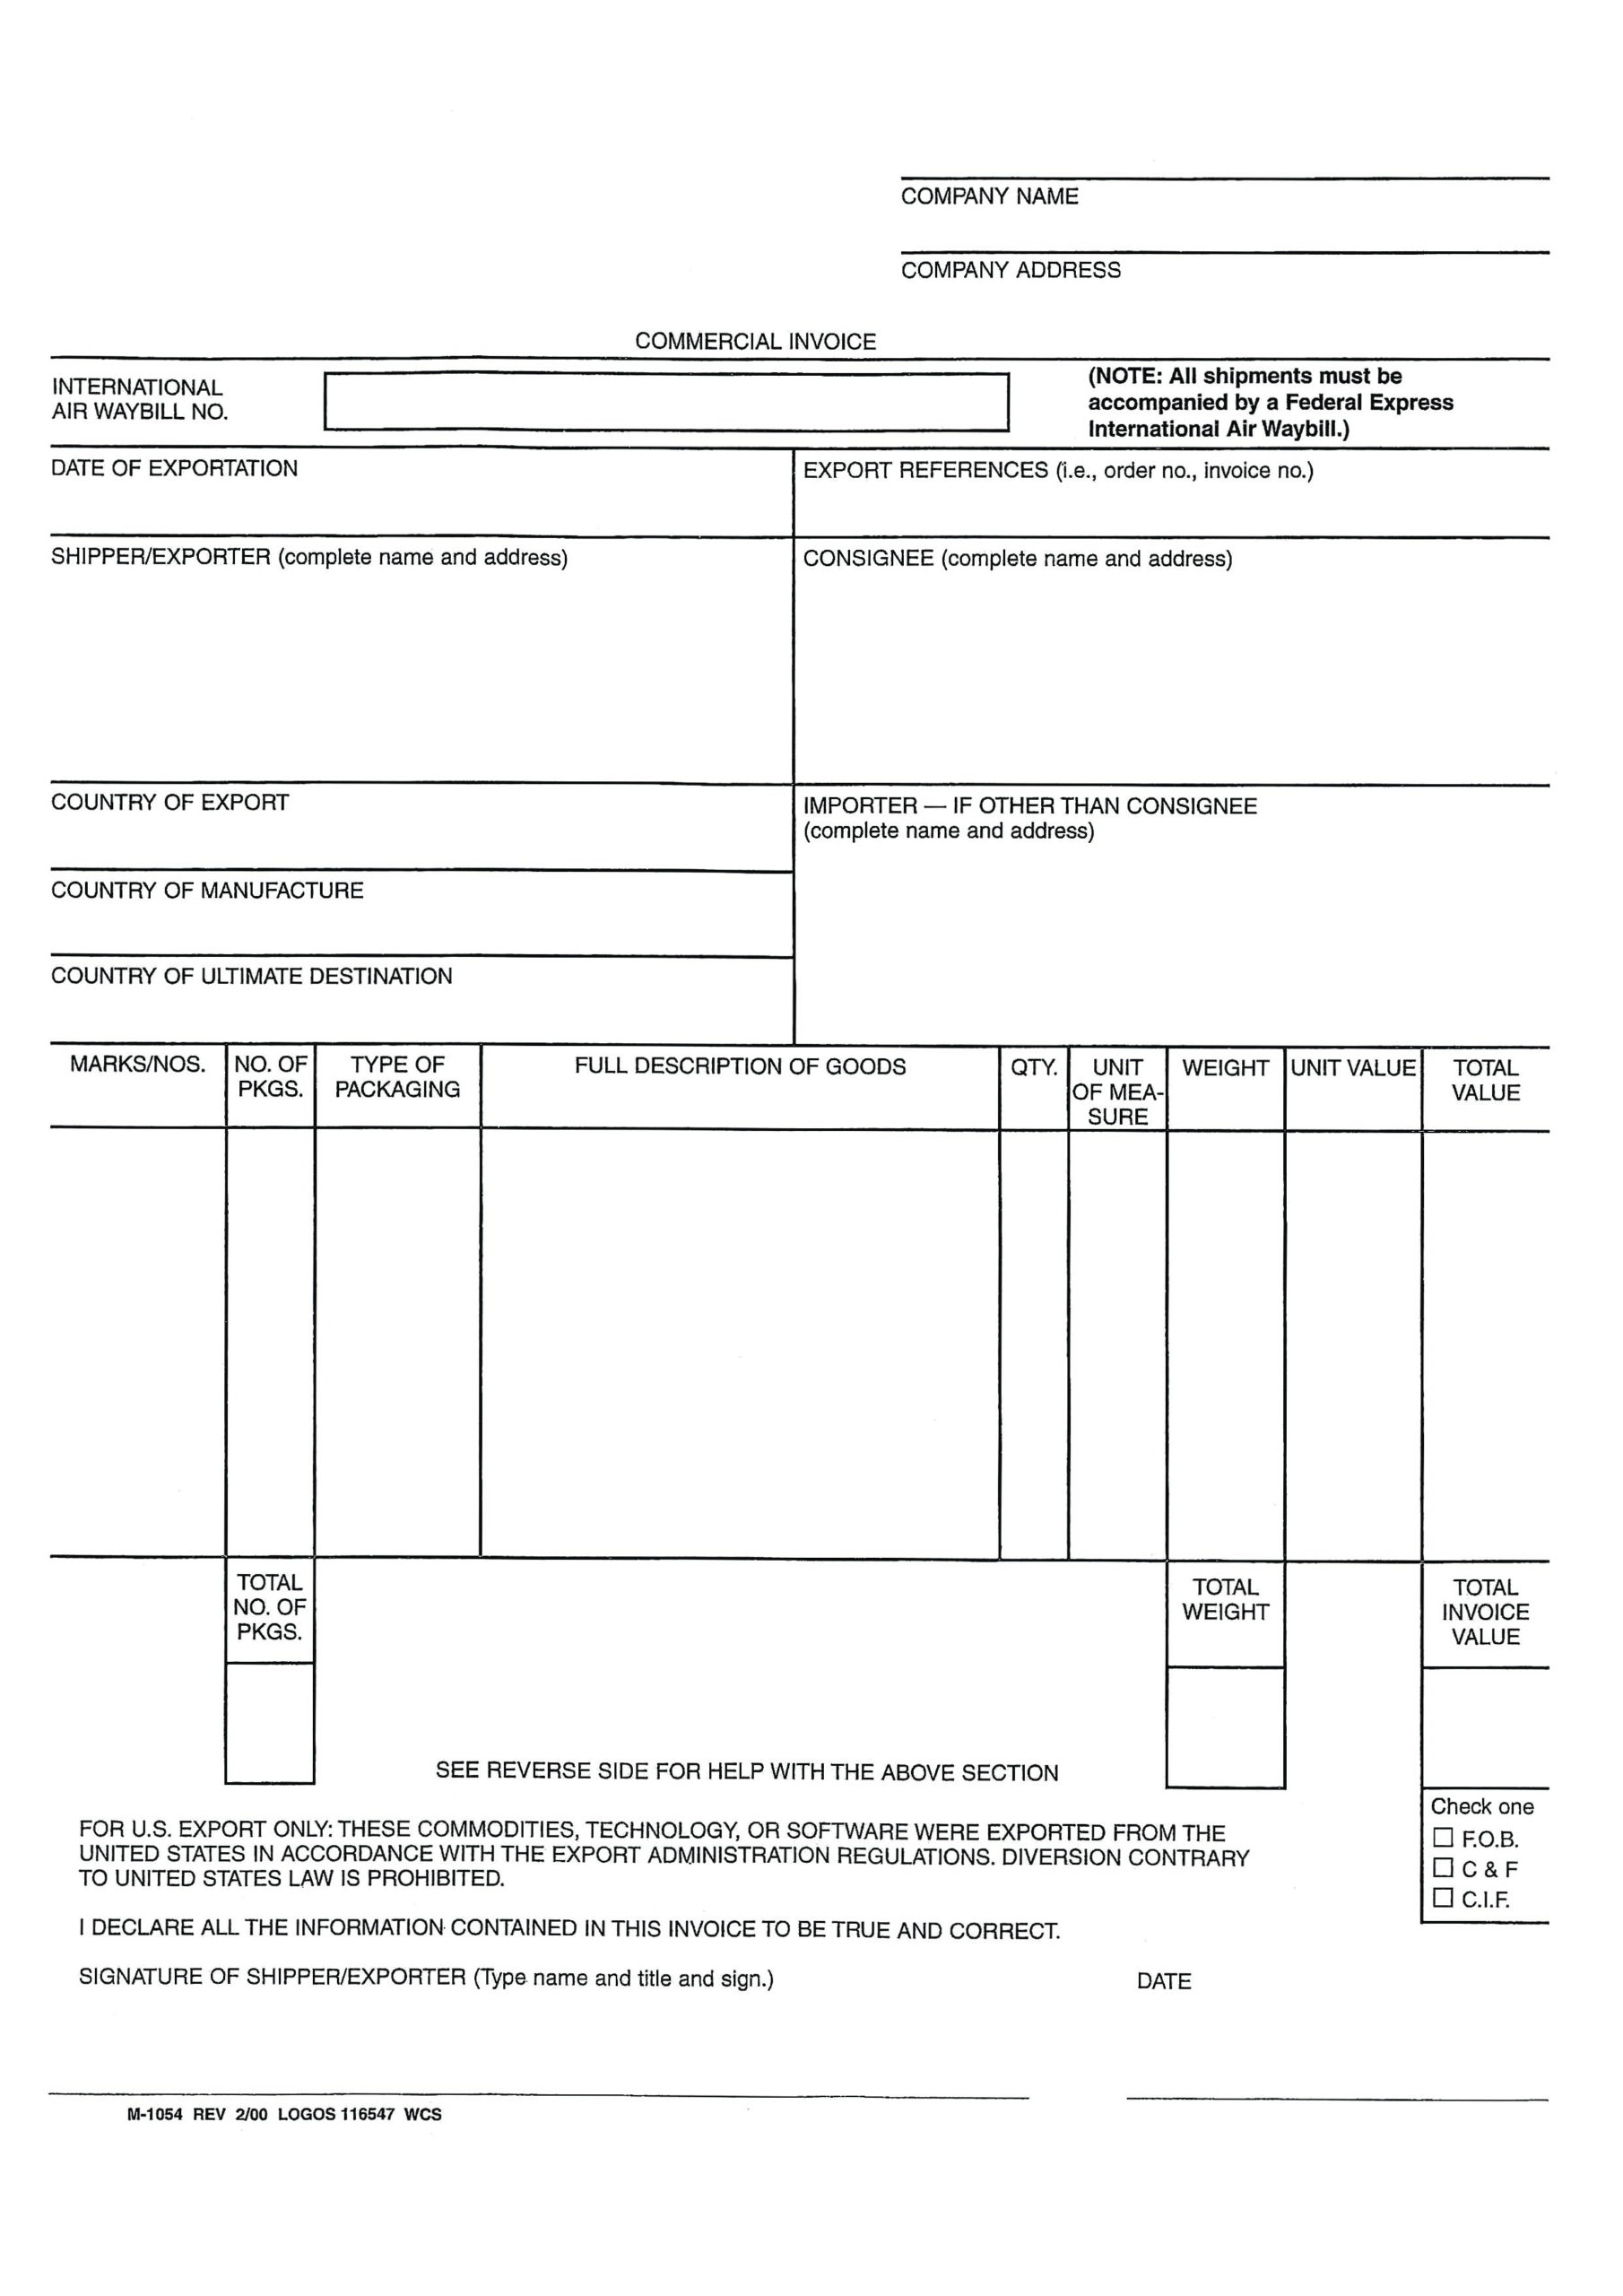 Blank Commercial Invoice Word | Templates At For Commercial Invoice Template Word Doc